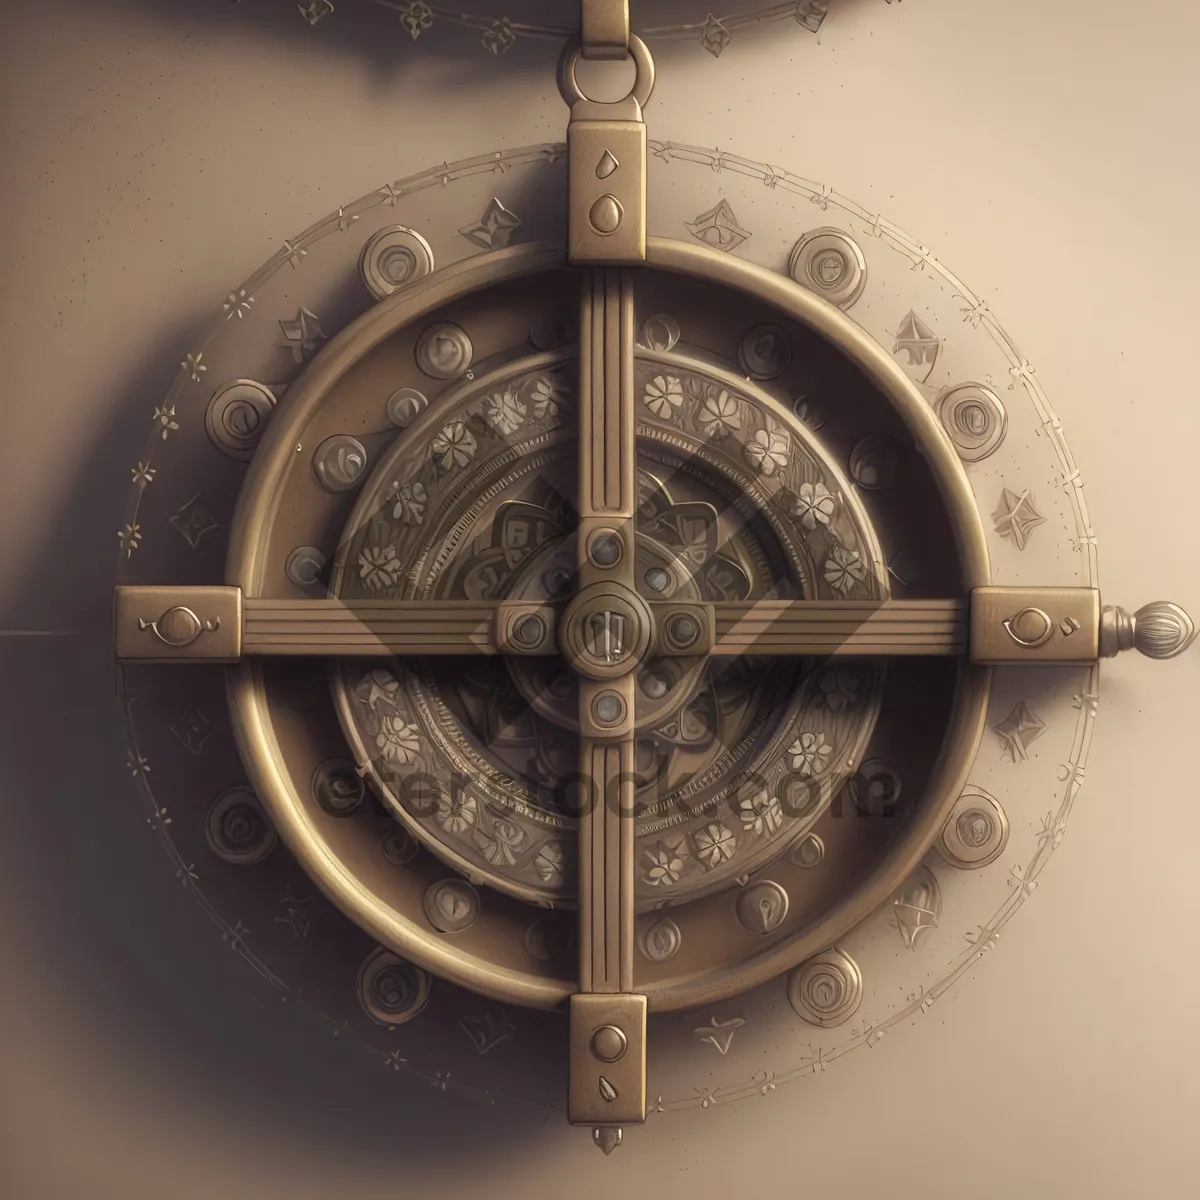 Picture of Vintage Mechanical Clock with Compass and Hour Hand